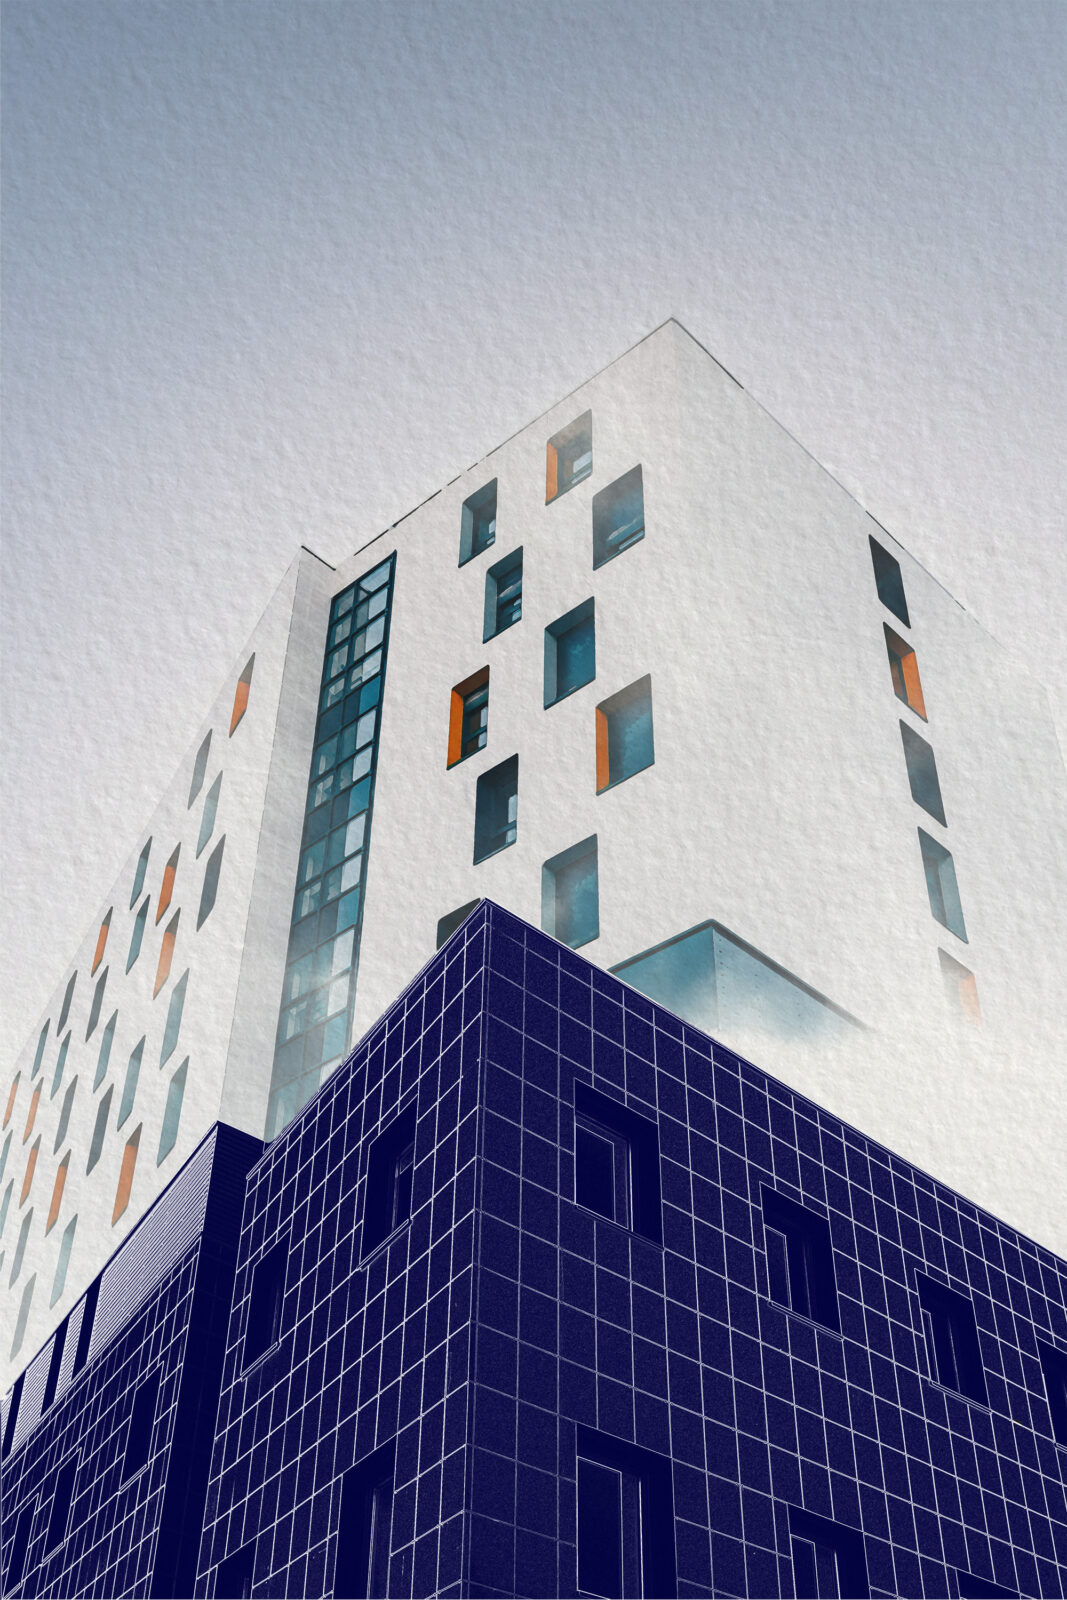 A watercolour apartment building emerges ethereally from a blueprint of the lower part of the building, reaching into the possibility of what it will one day become.